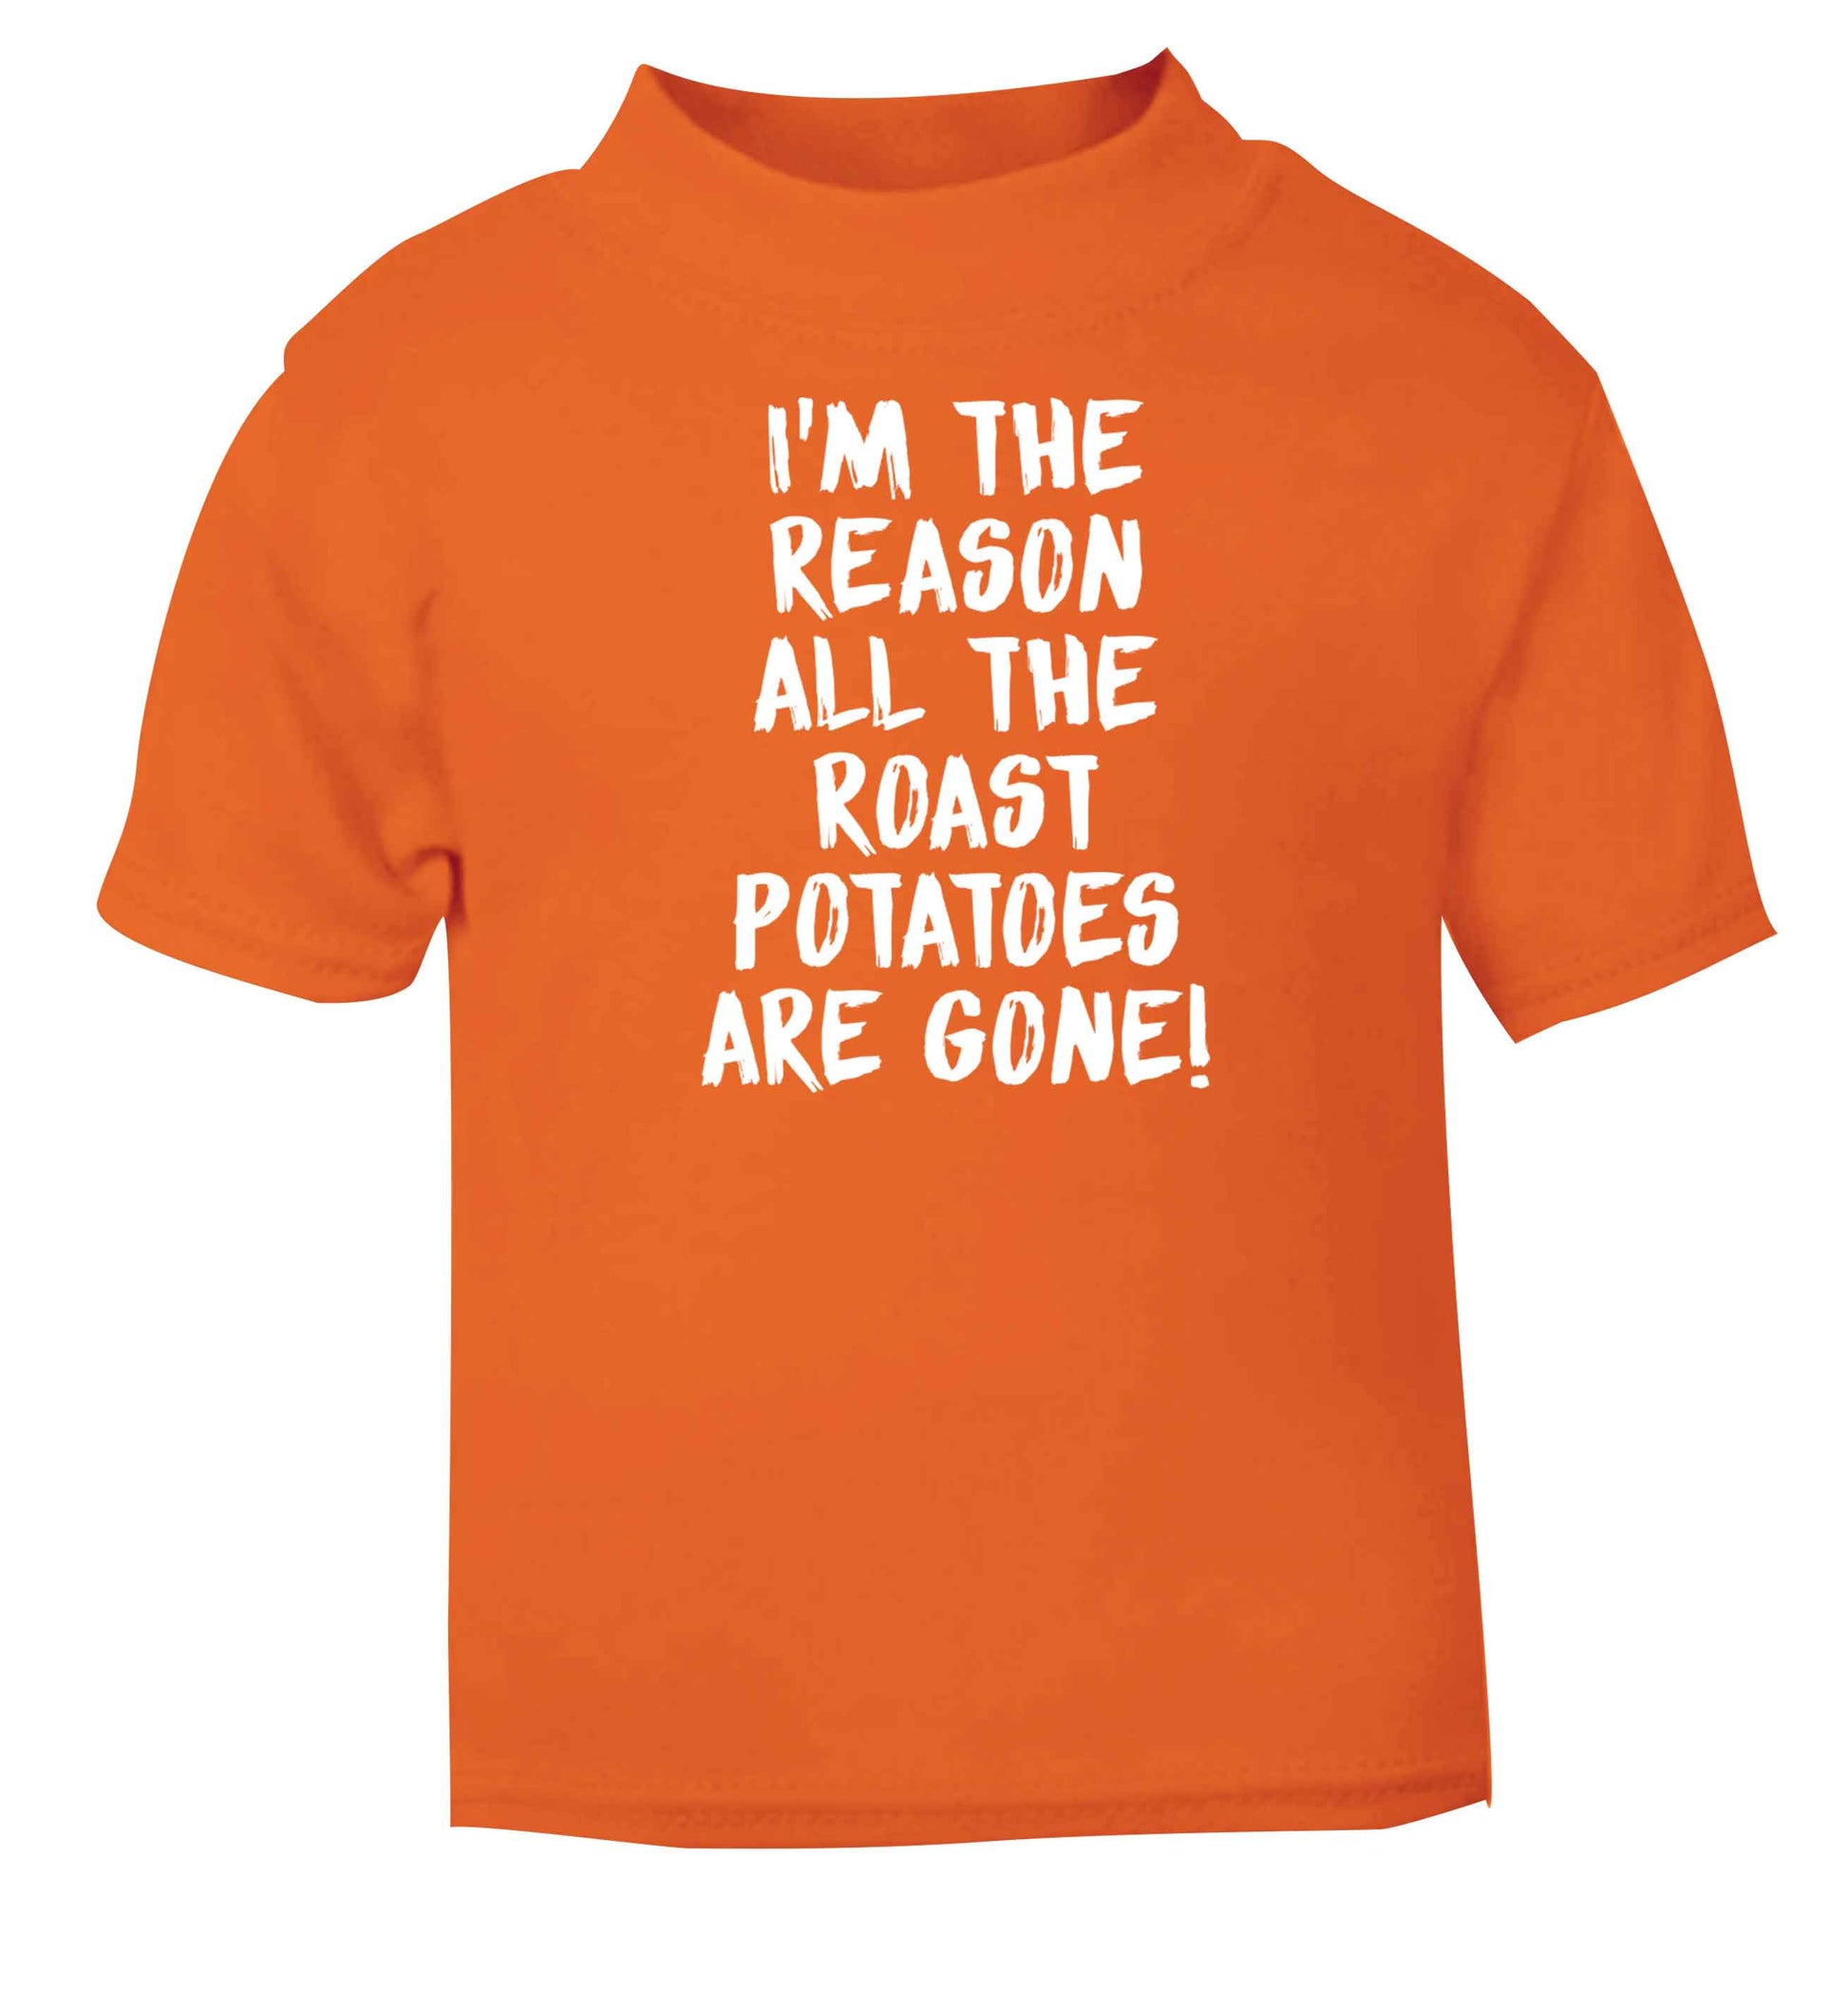 I'm the reason all the roast potatoes are gone orange baby toddler Tshirt 2 Years